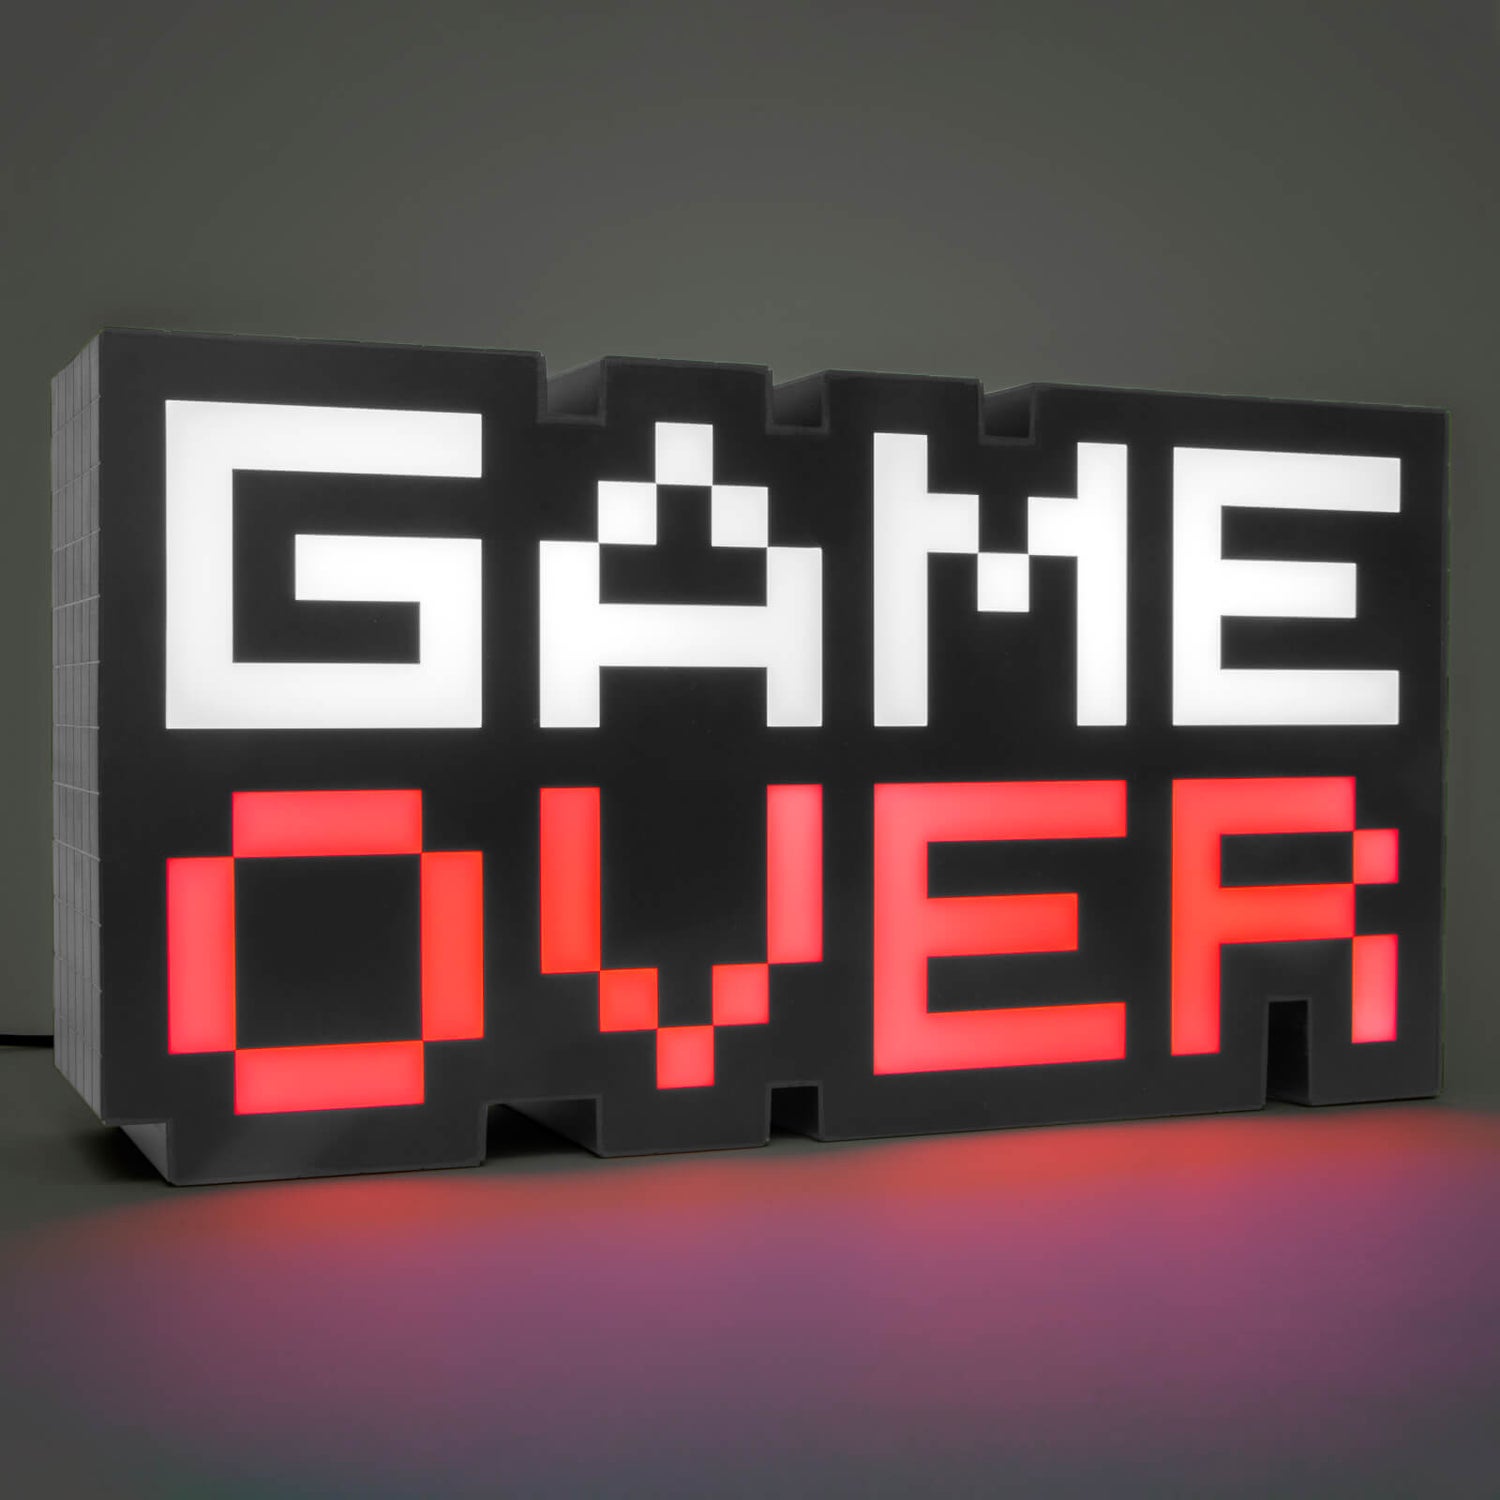 Lampe Game Over